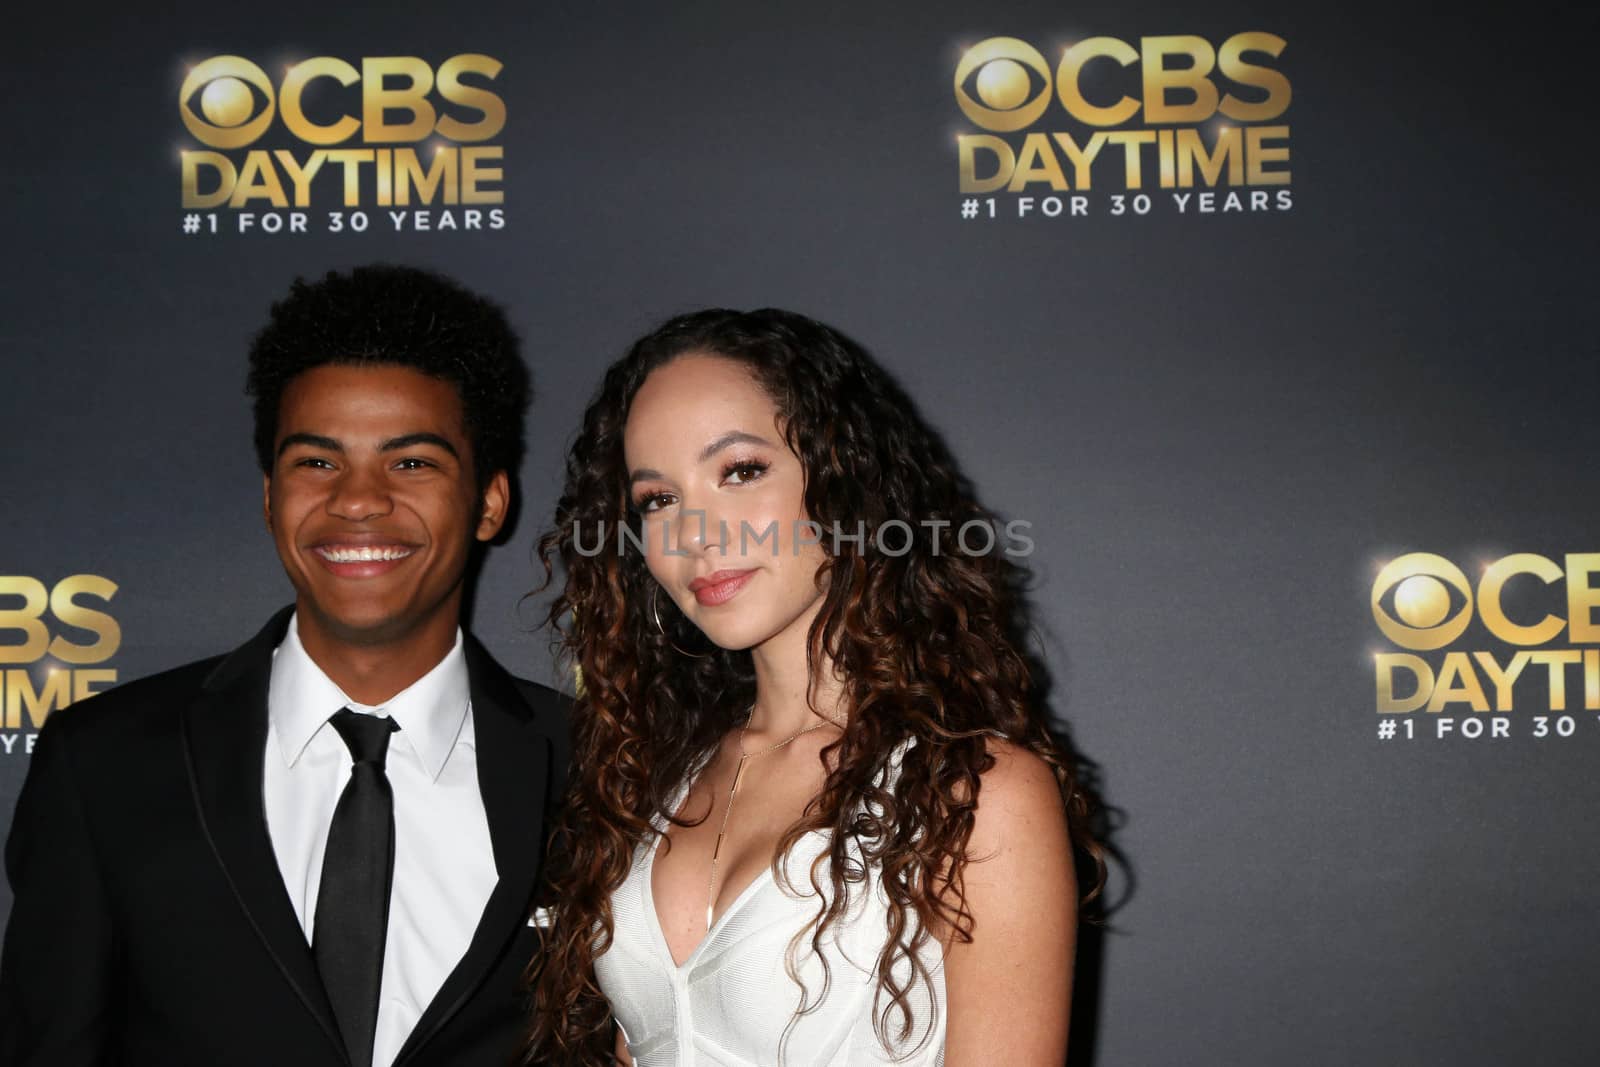 Noah Alexander Gerry, Lexie Stevenson
at the CBS Daytime Emmy After Party, Pasadena Conference Center, Pasadena, CA 04-30-17/ImageCollect by ImageCollect